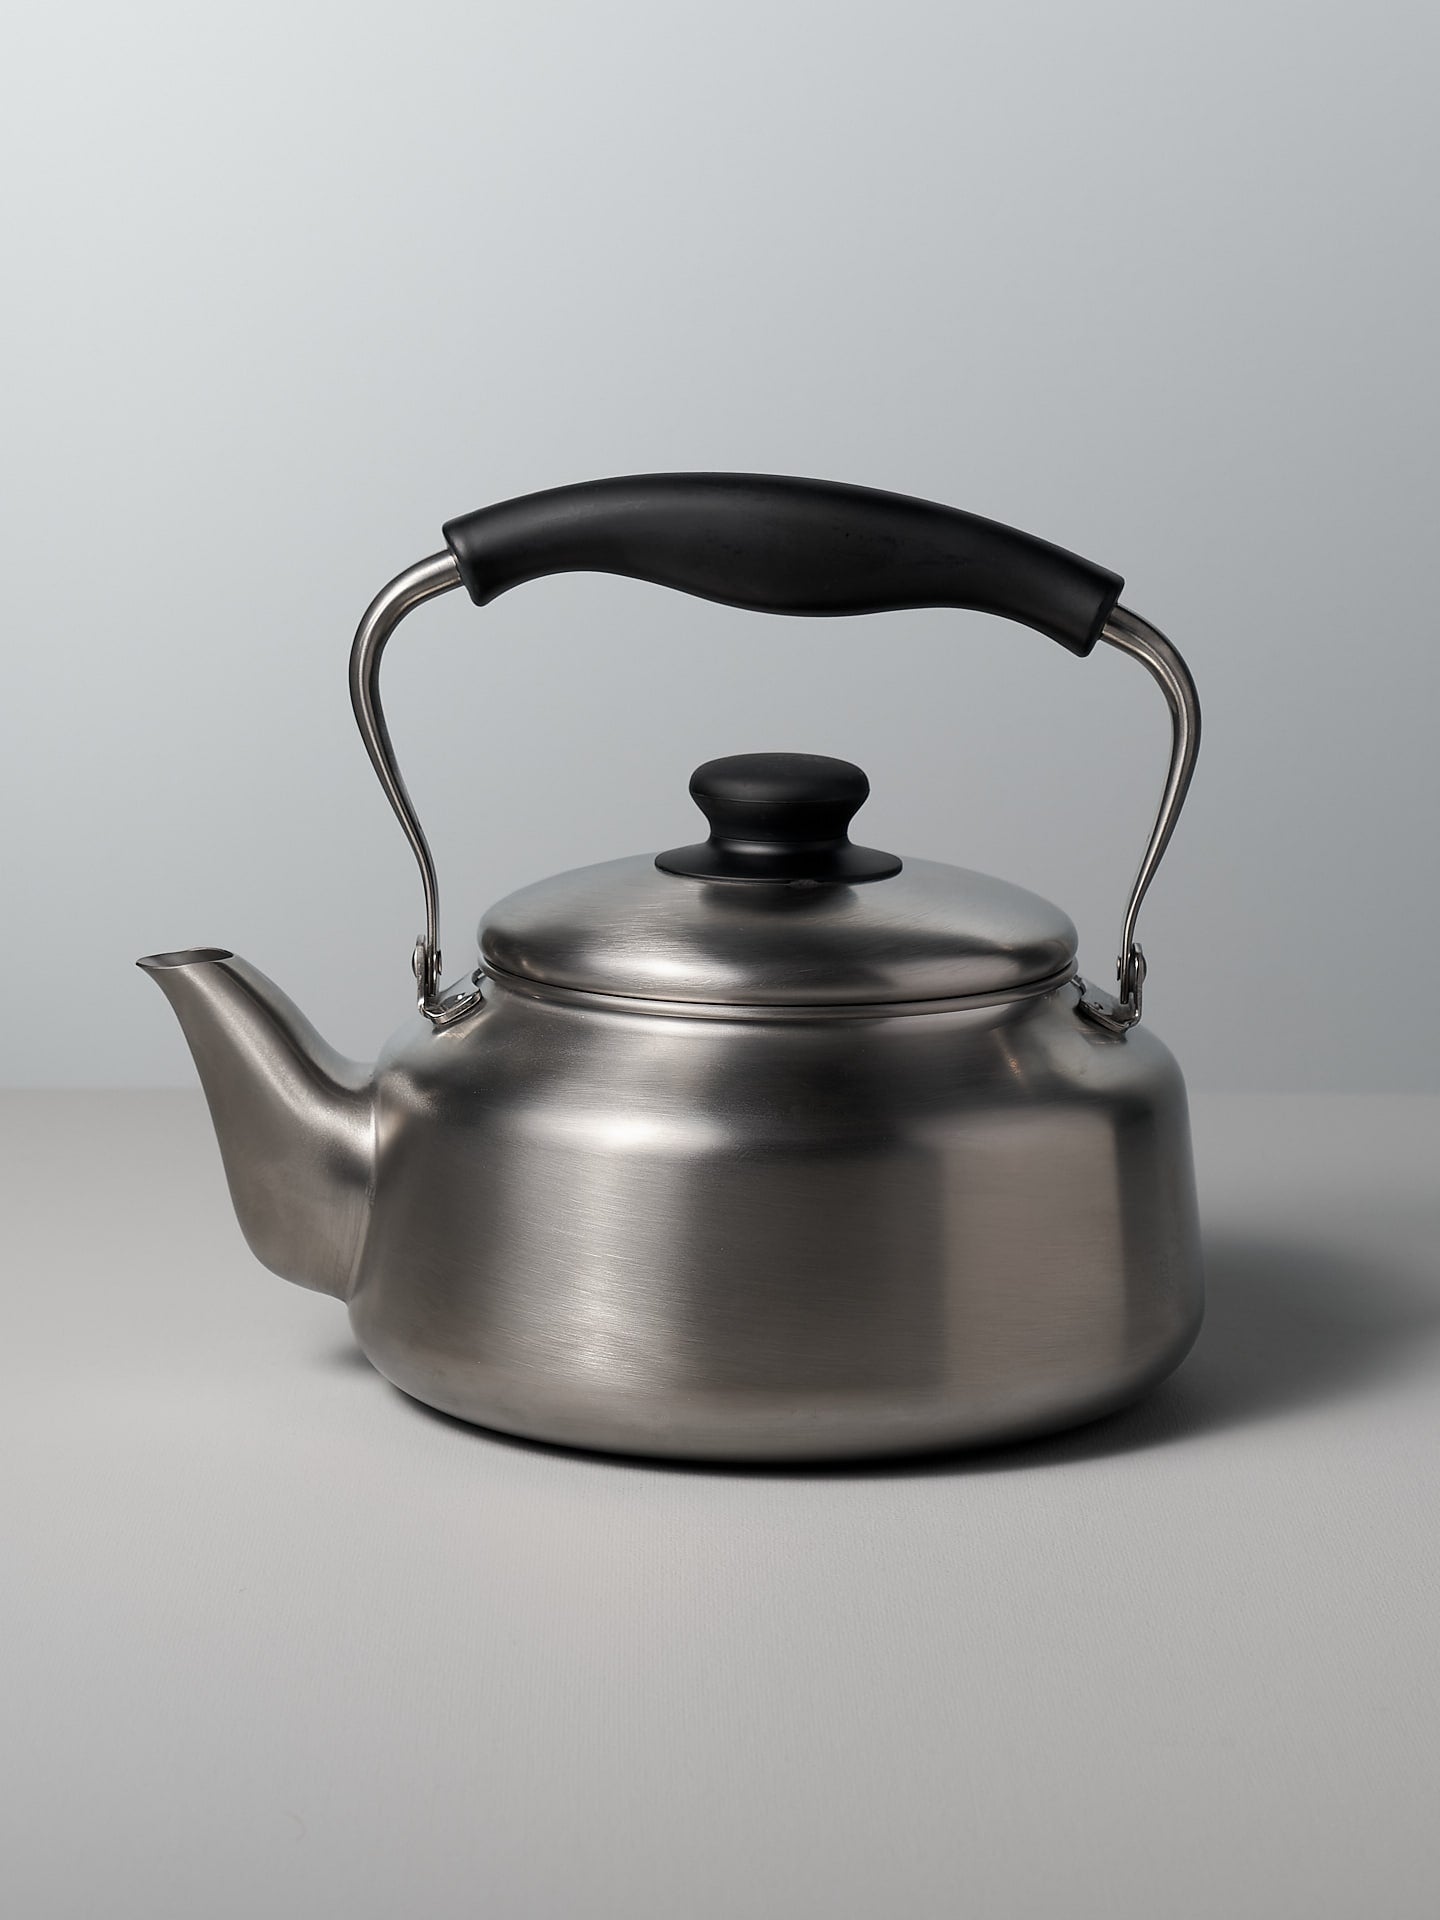 A Sori Yanagi Stove-top Kettle - Brushed Steel on a white background.